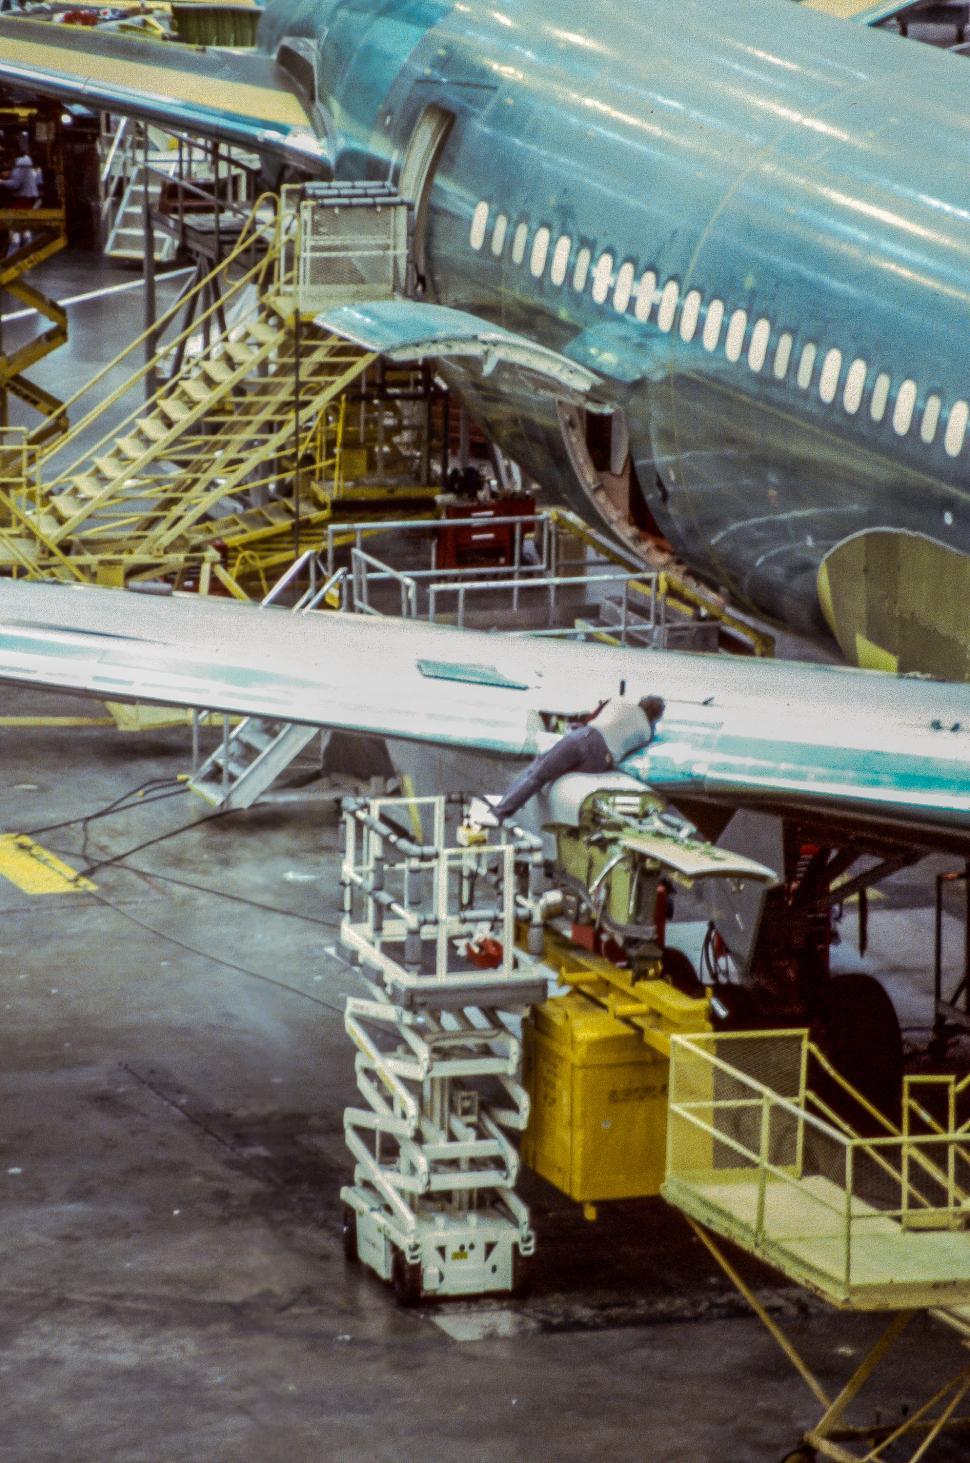 Free Image of Aircraft Manufacturing Facility 